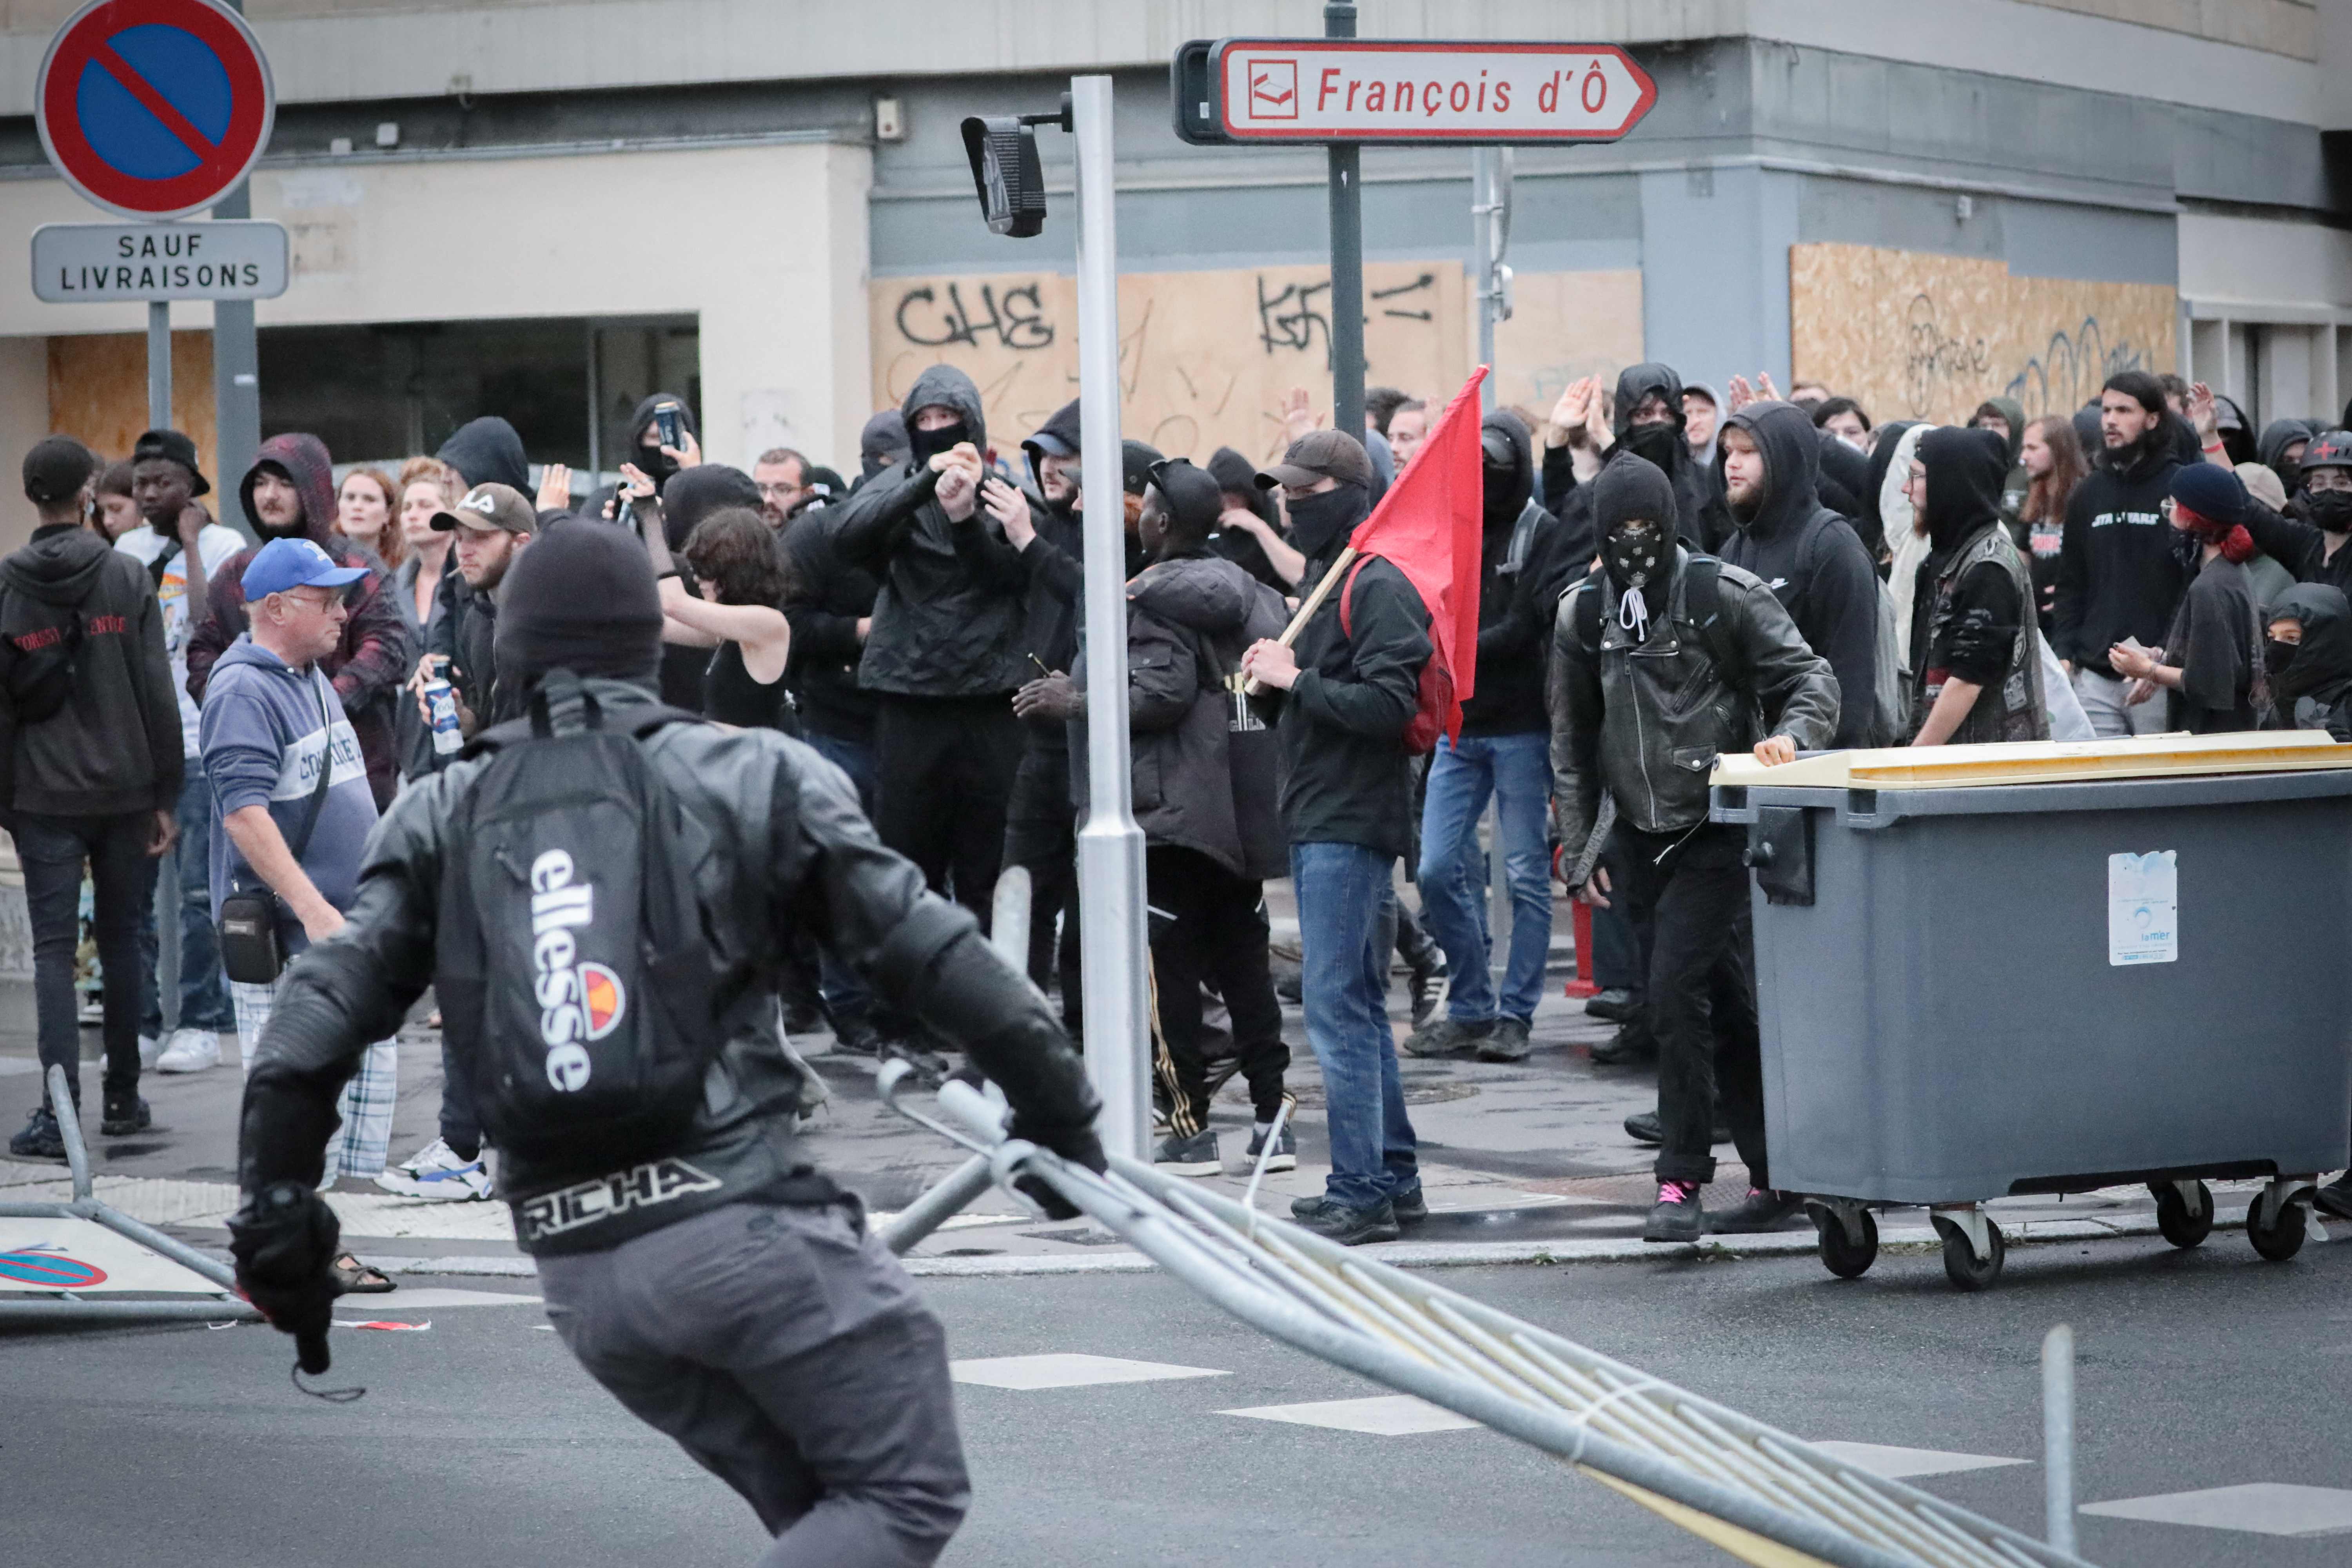 Protests in Caen, northwestern France